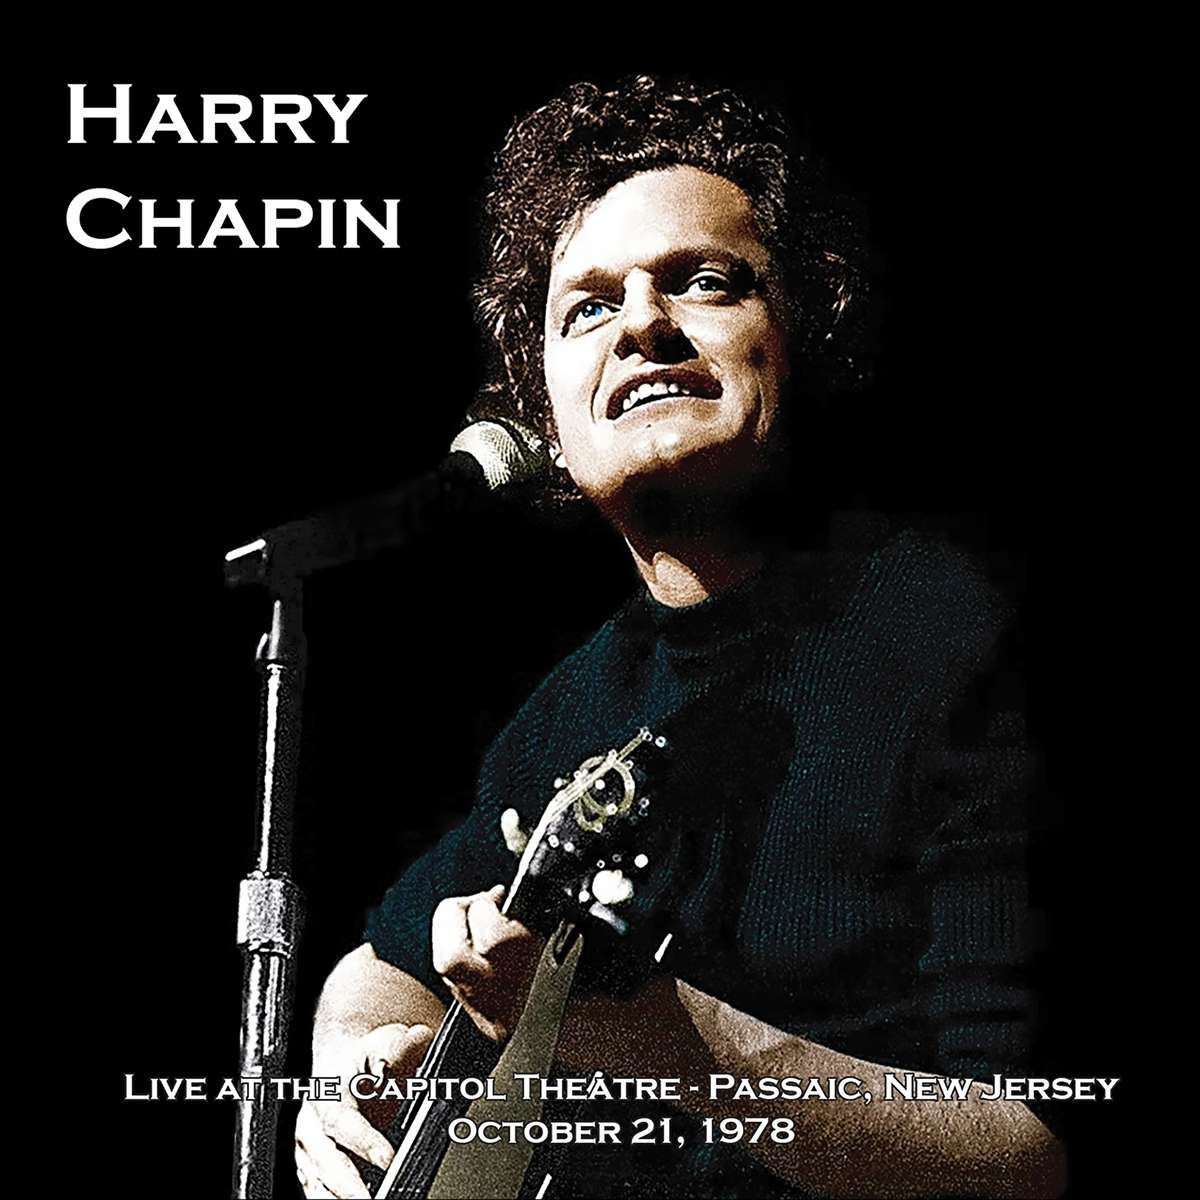 LIVE AT THE CAPITOL THEATER OCTOBER 21, 1978 (NATURAL CLEAR VINYL)